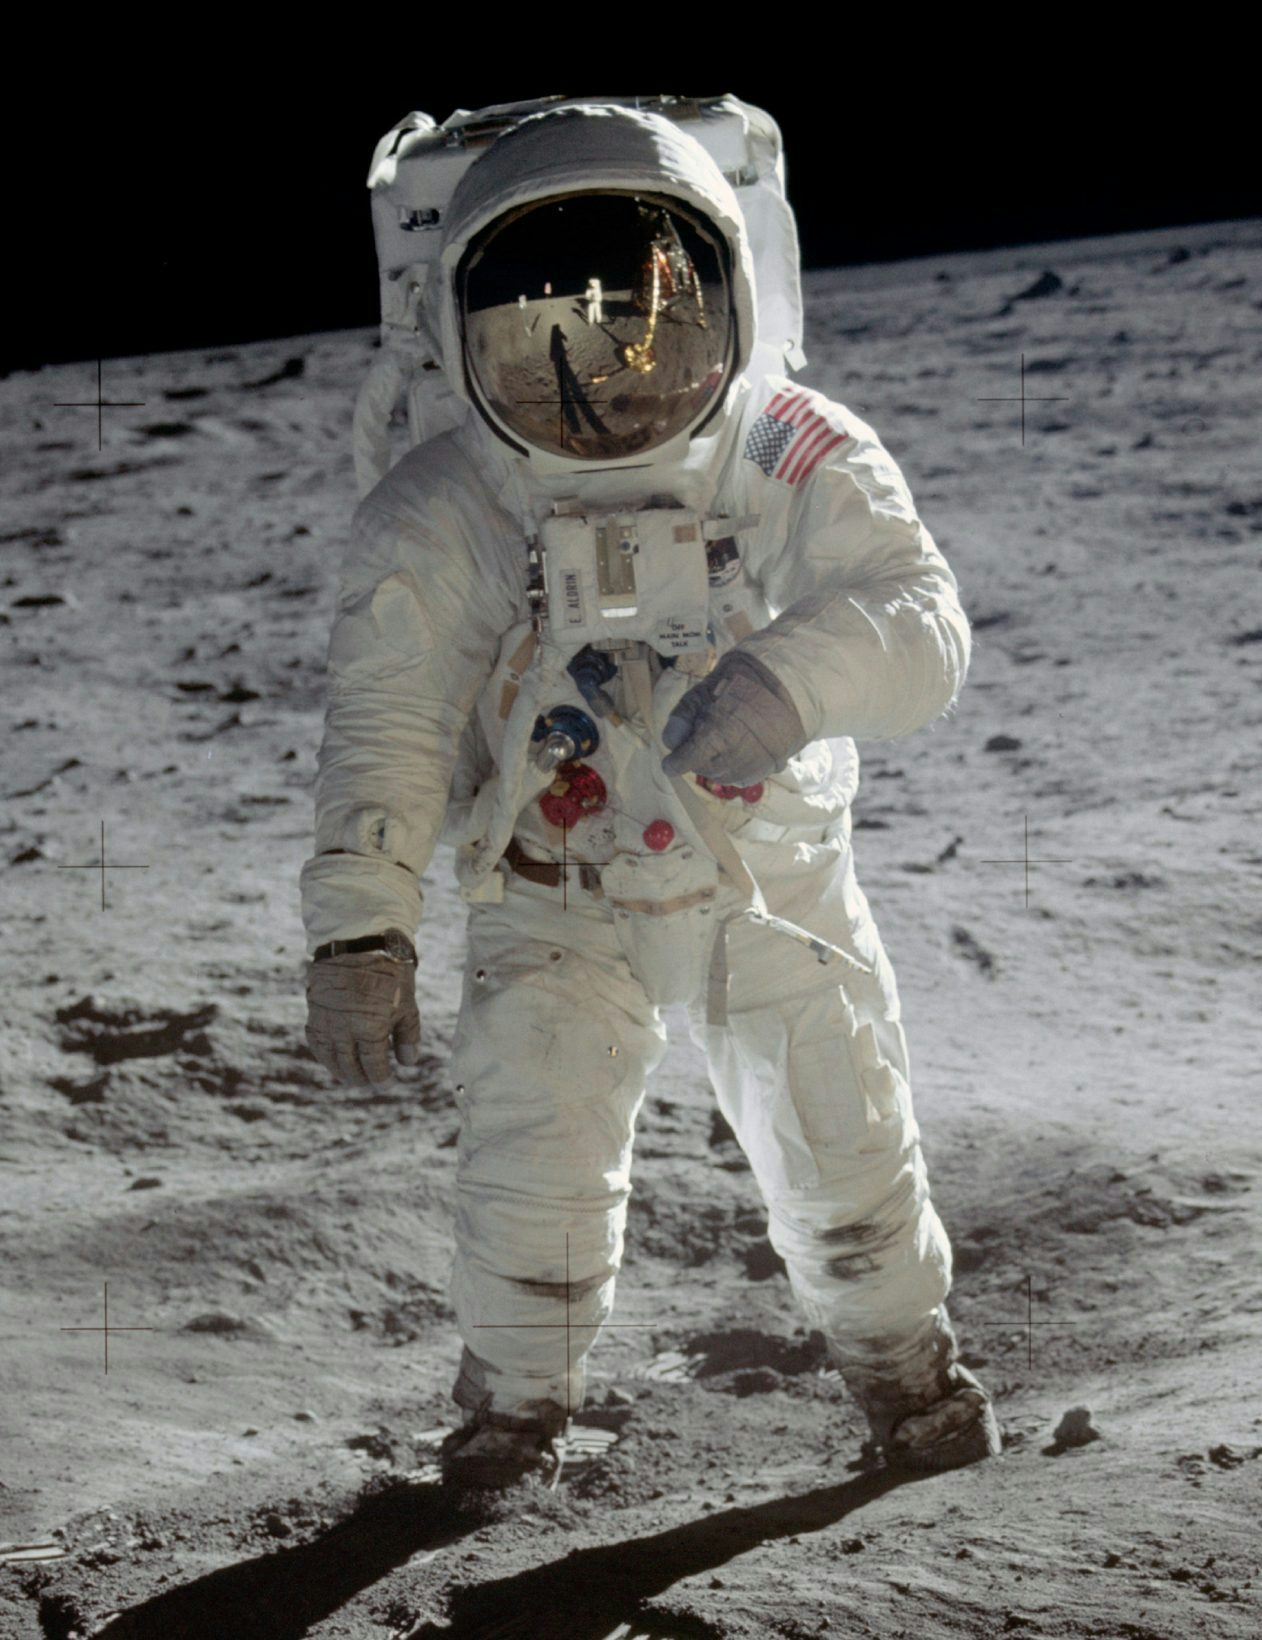 On 21 July, Buzz Aldrin celebrates the moon landing with Omega